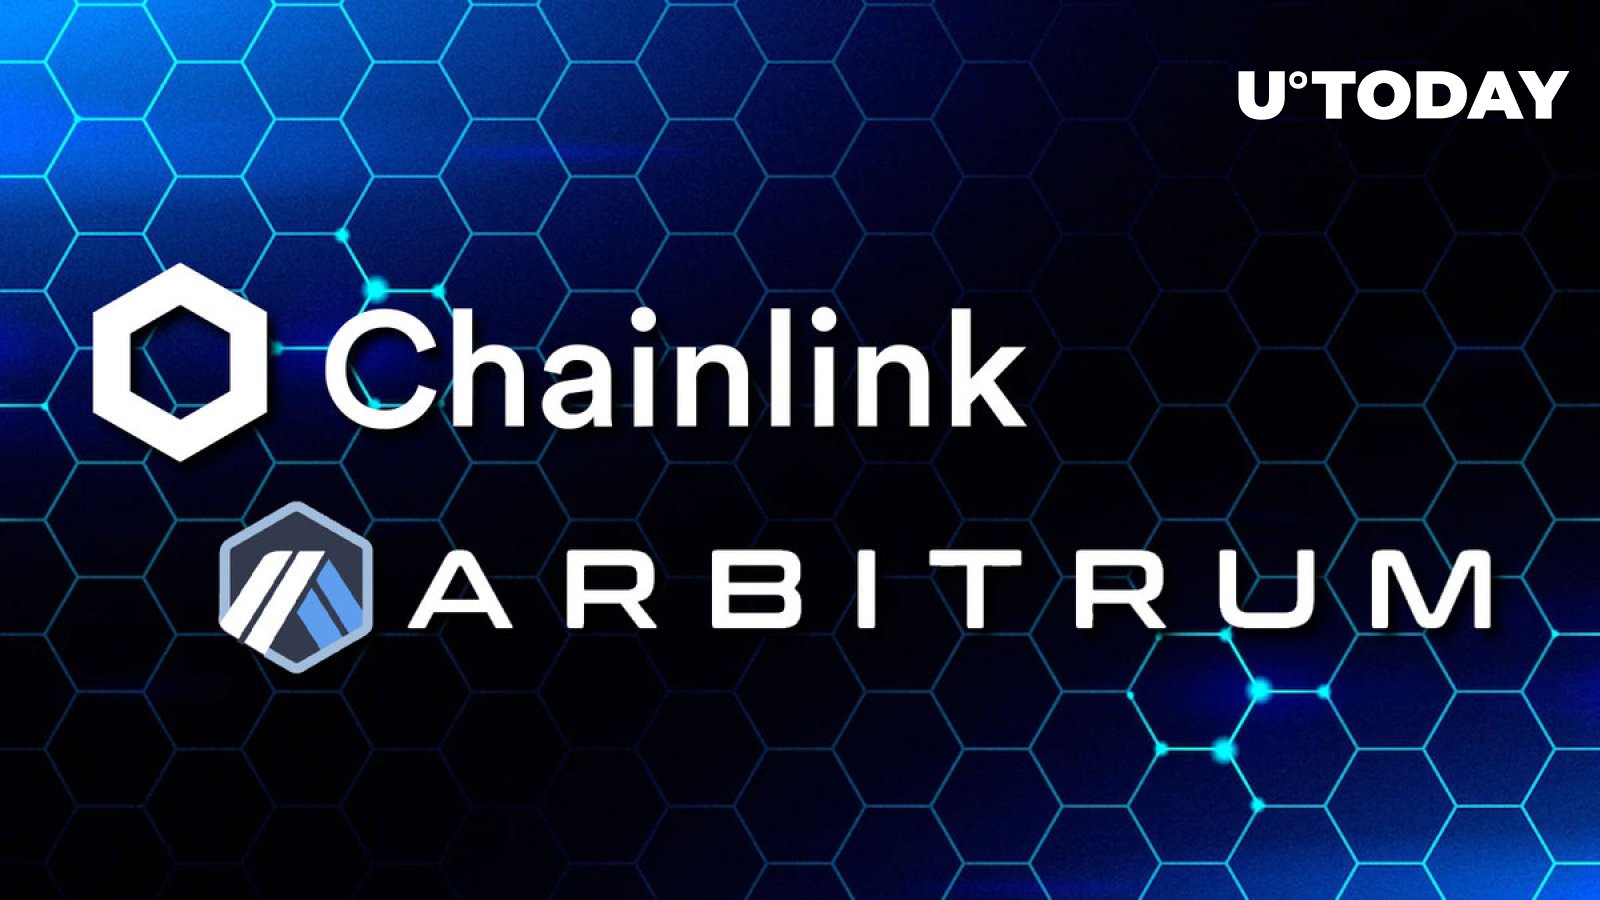 Chainlink and Arbitrum: Partnership That Could Impact Crypto Market